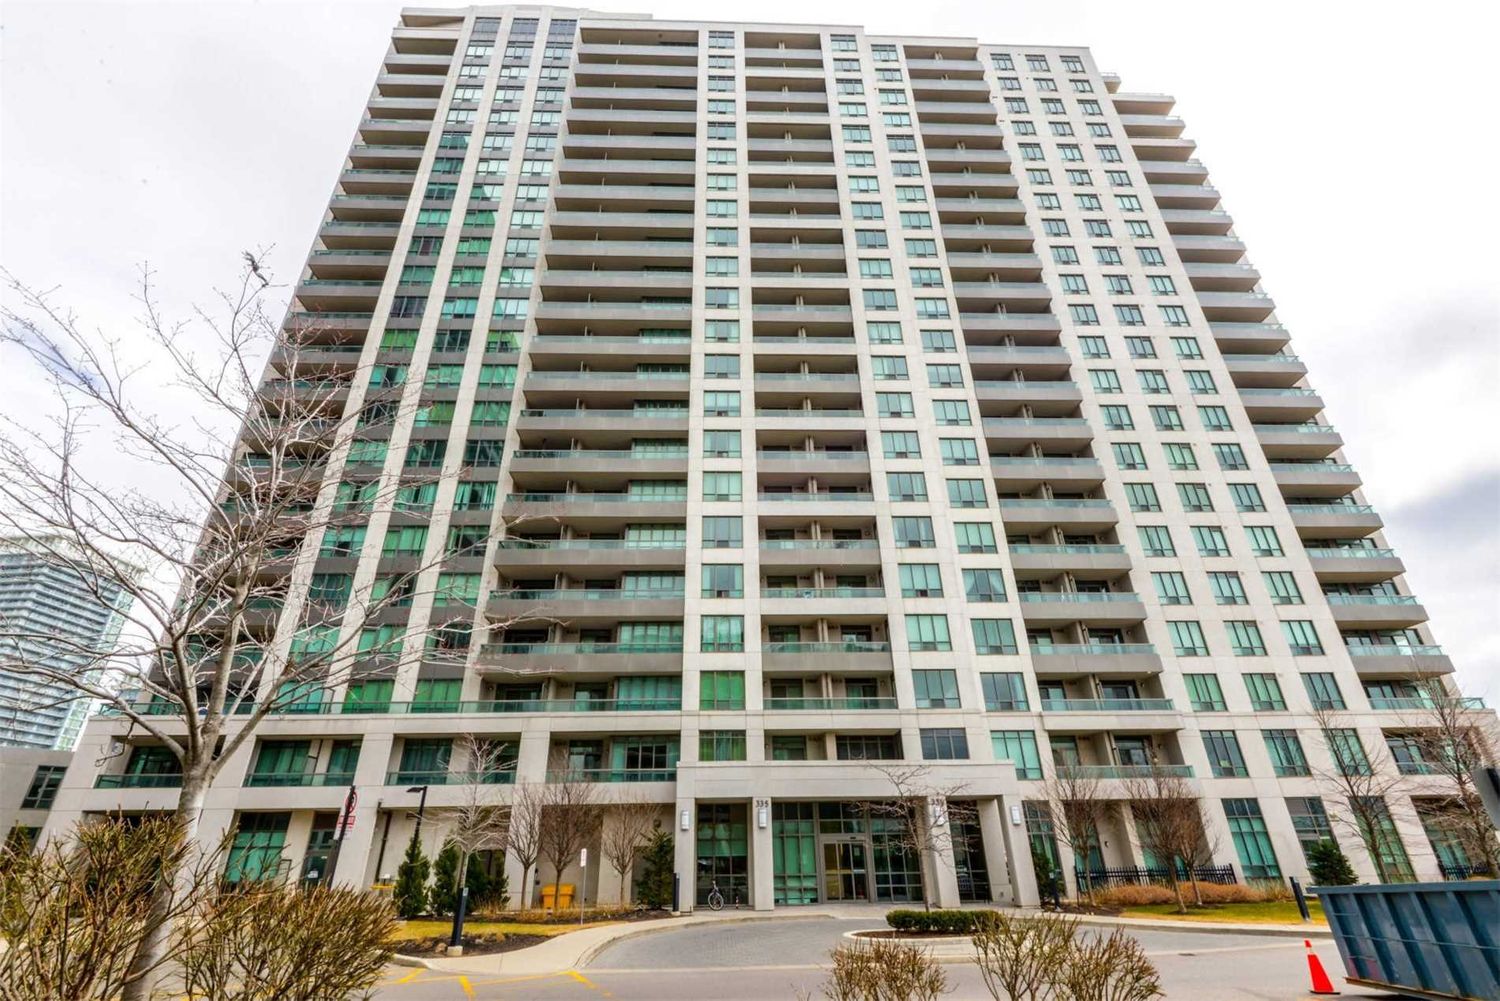 335 Rathburn Road W. Universal Condos is located in  Mississauga, Toronto - image #1 of 3